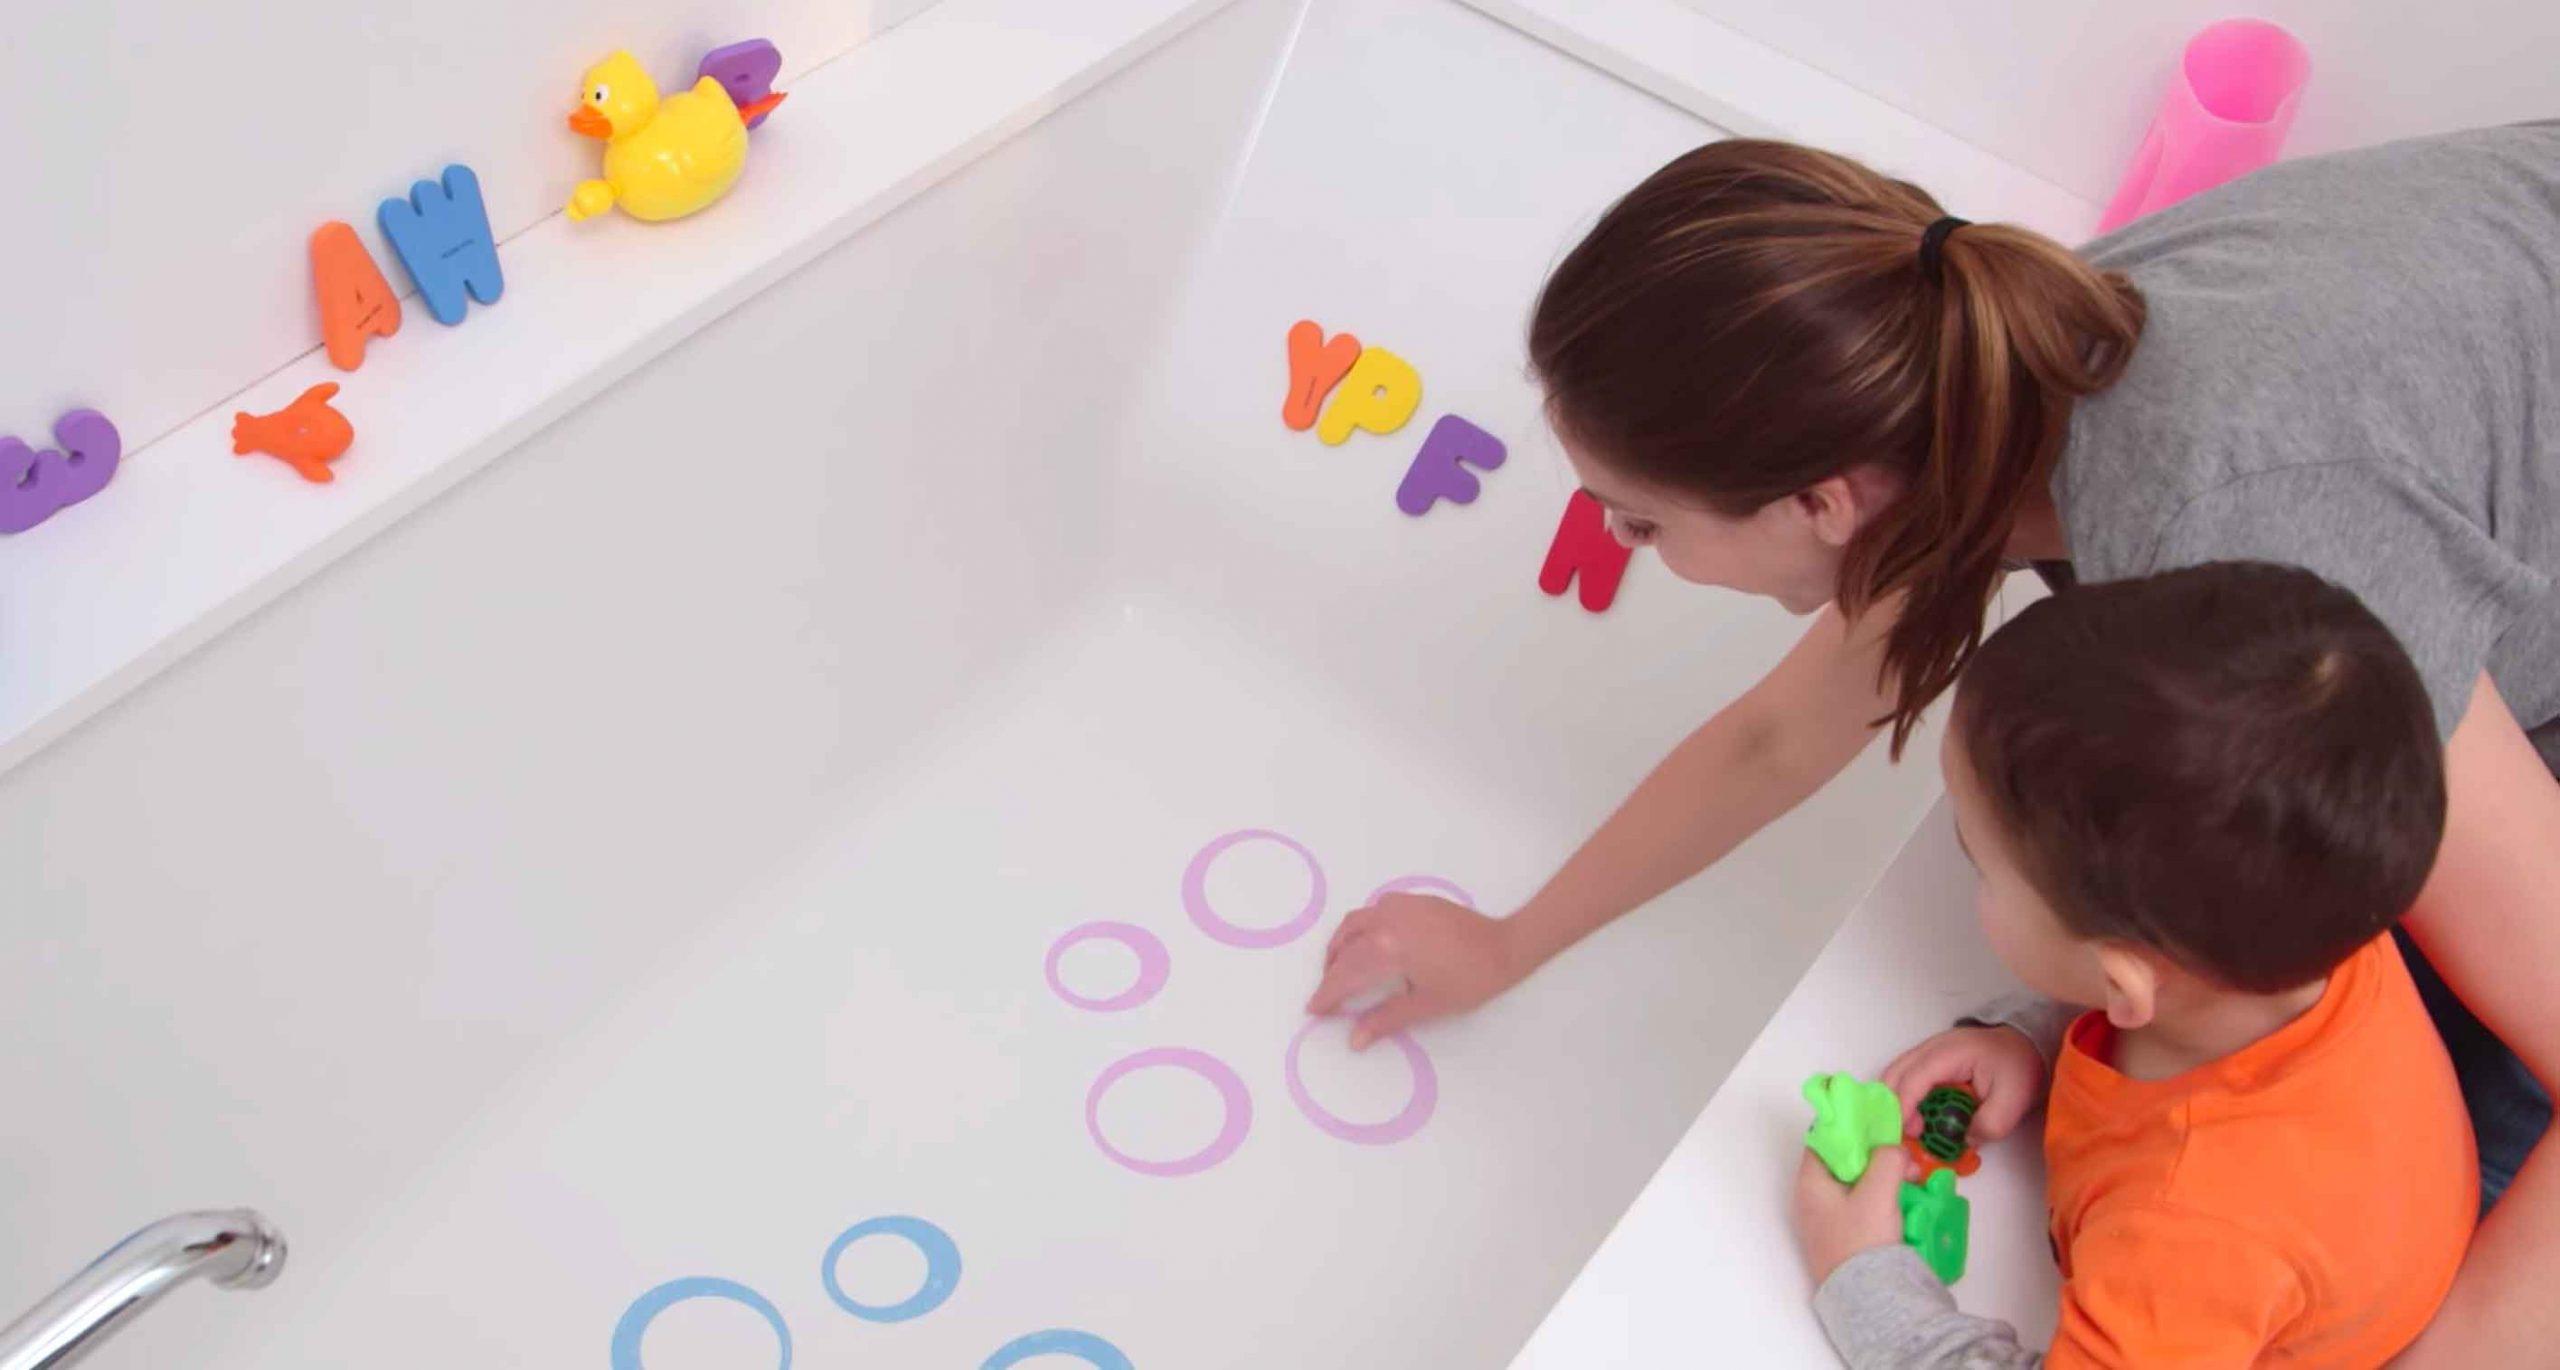 Bath time can be a struggle. Check out these mom hacks from What's Up Moms that will make bath time so much less stressful.